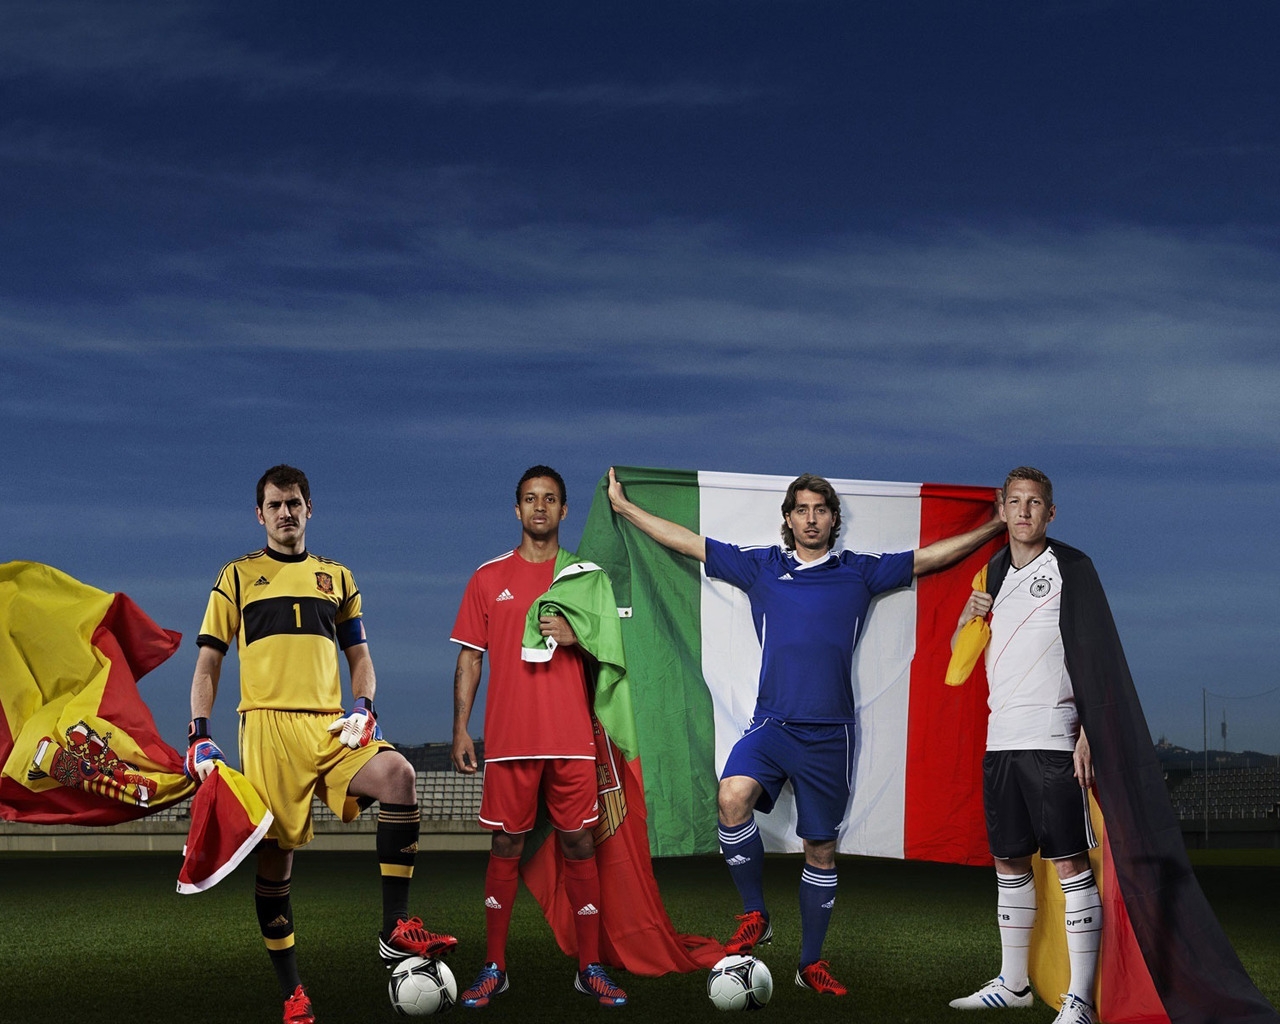 Spain Portugal Italy and Germany for 1280 x 1024 resolution